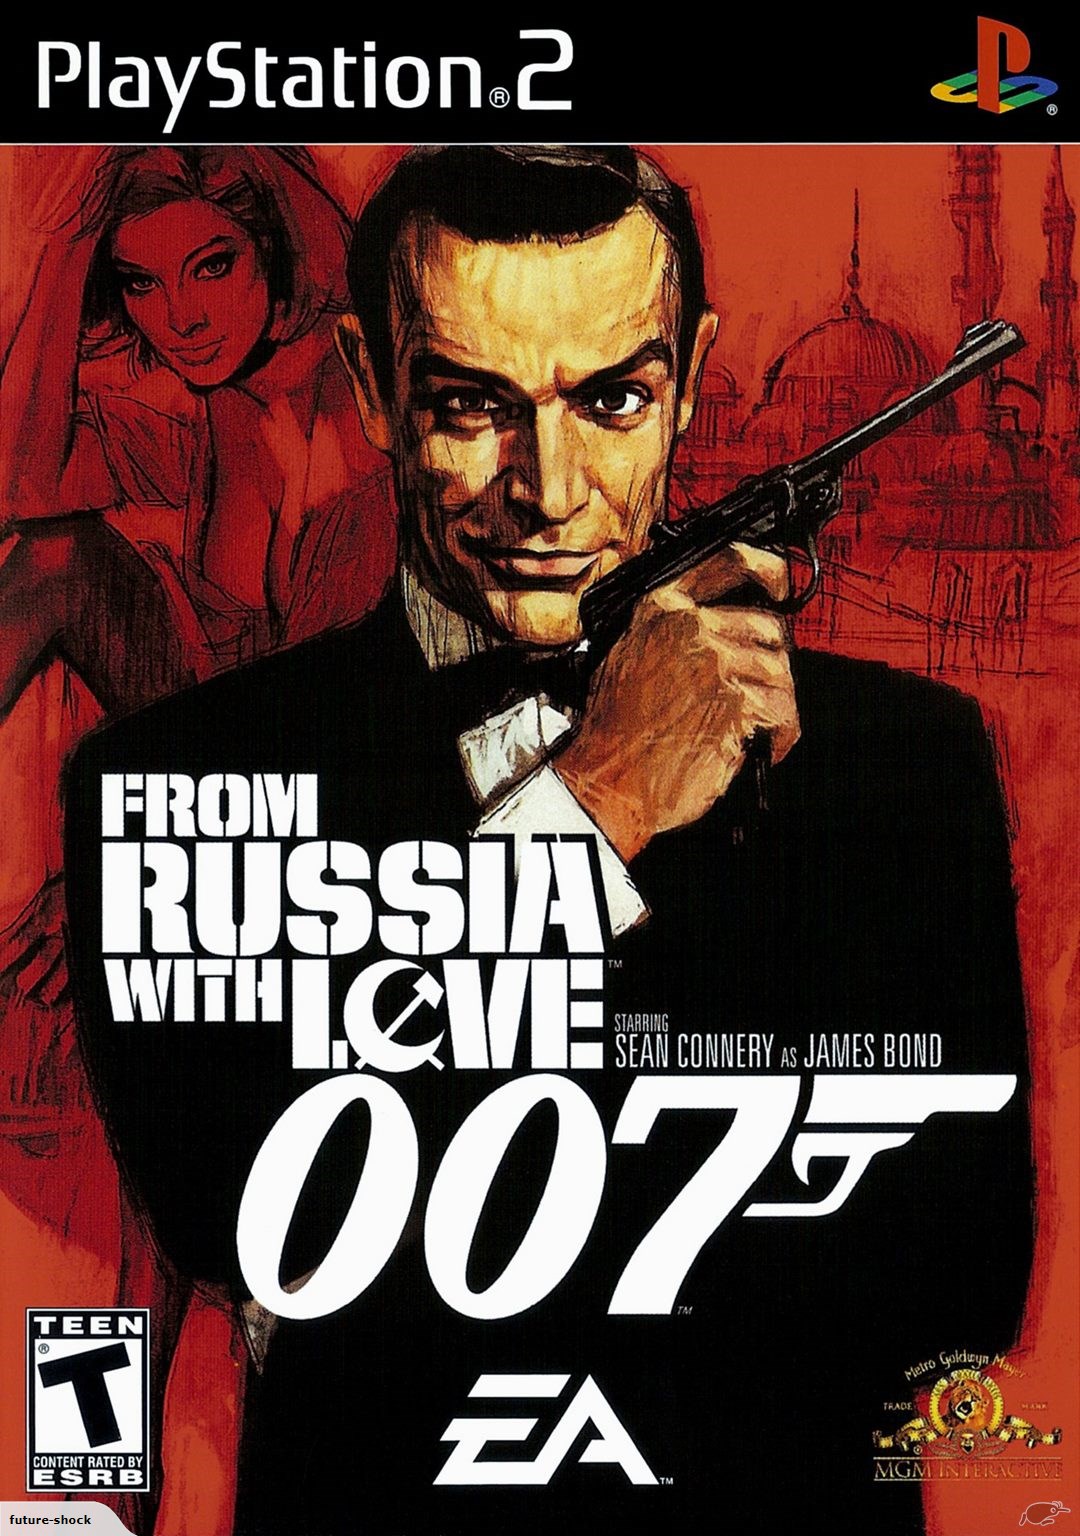 From Russia With Love 007